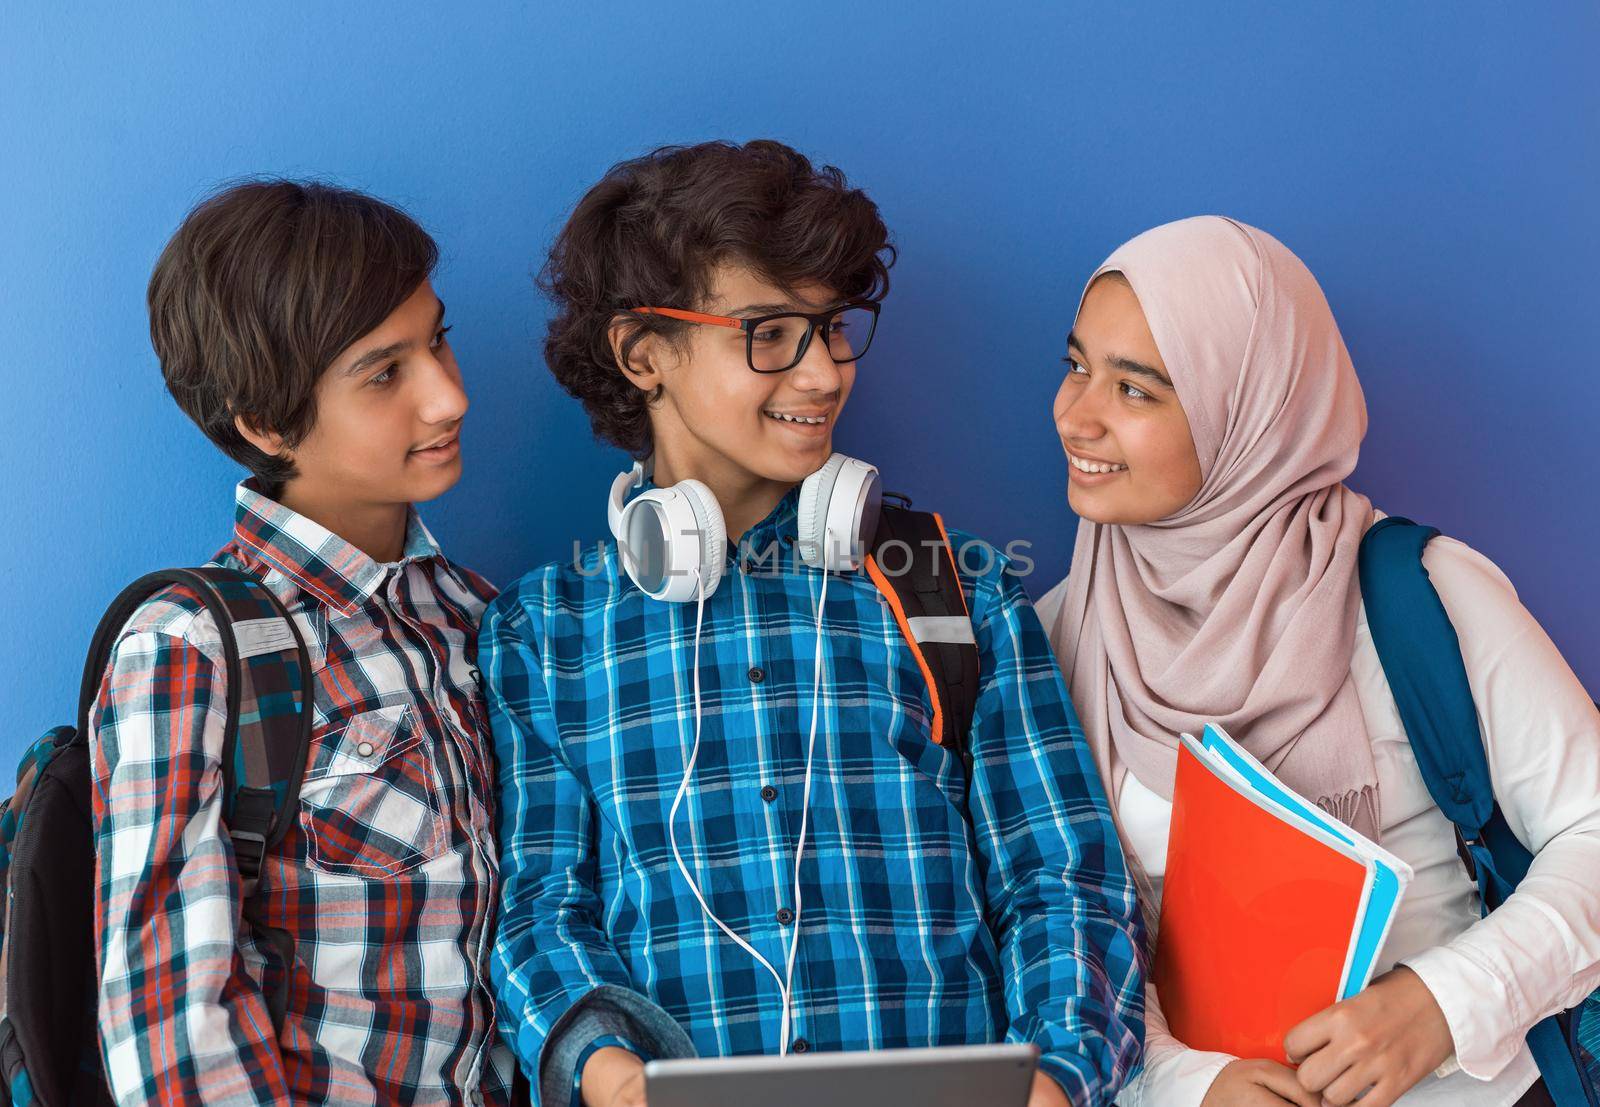 Modern arab teens use smartphone, tablet and latpop to study during online classes due to corona virus pandemic by dotshock